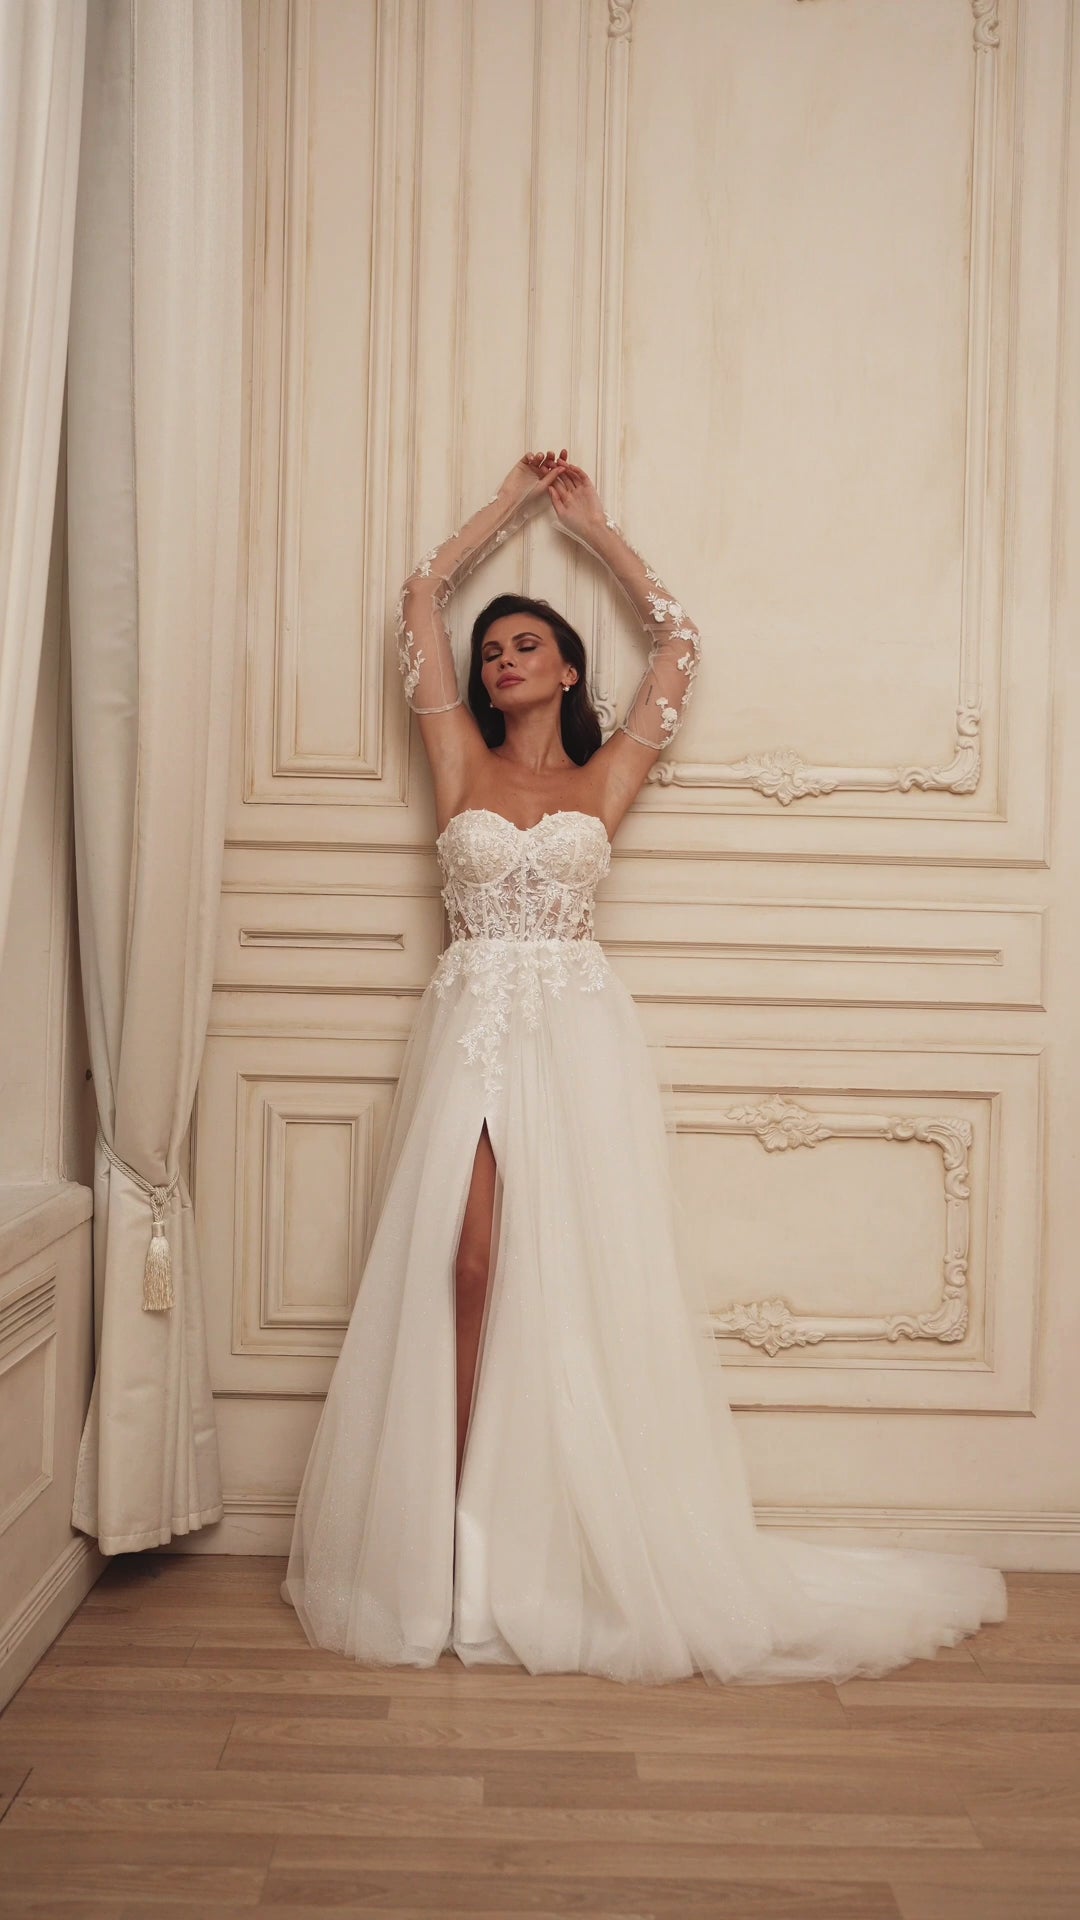 Stunning Off-the-Shoulder Ball Gown with Lace Appliqués and Dramatic Train Plus Size